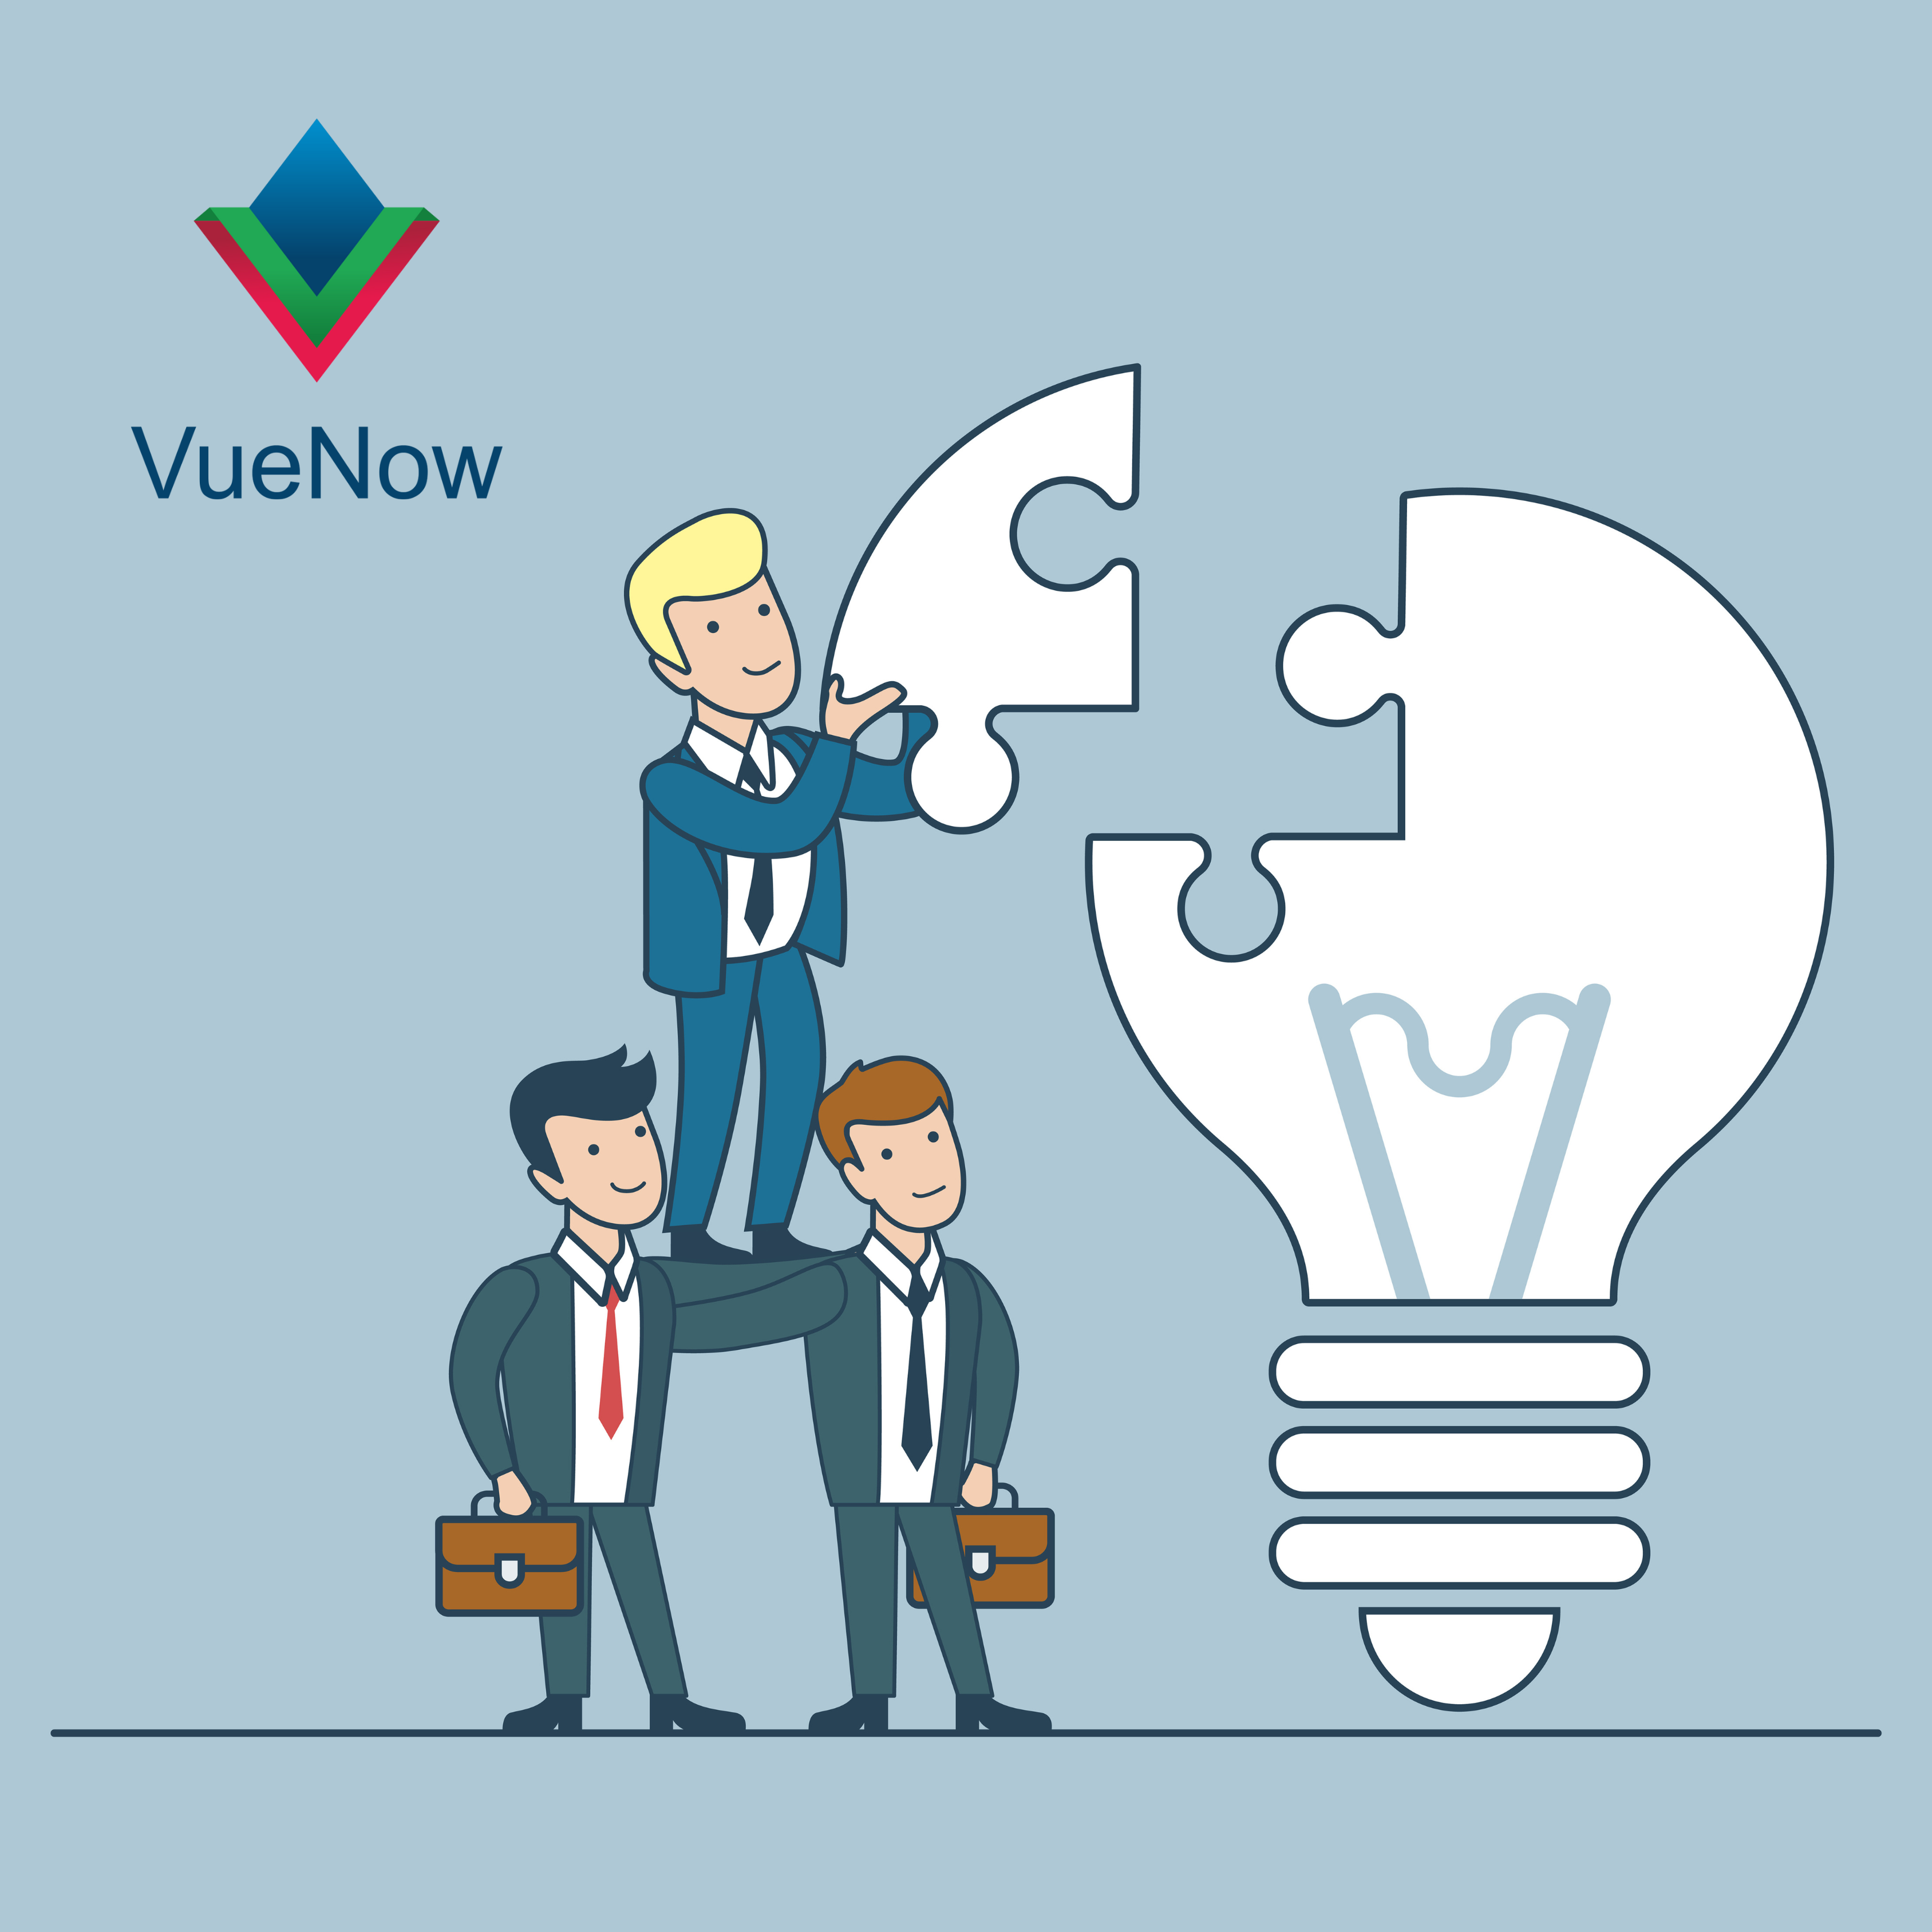 Vuenow-Merger-Promoters-Shareholding